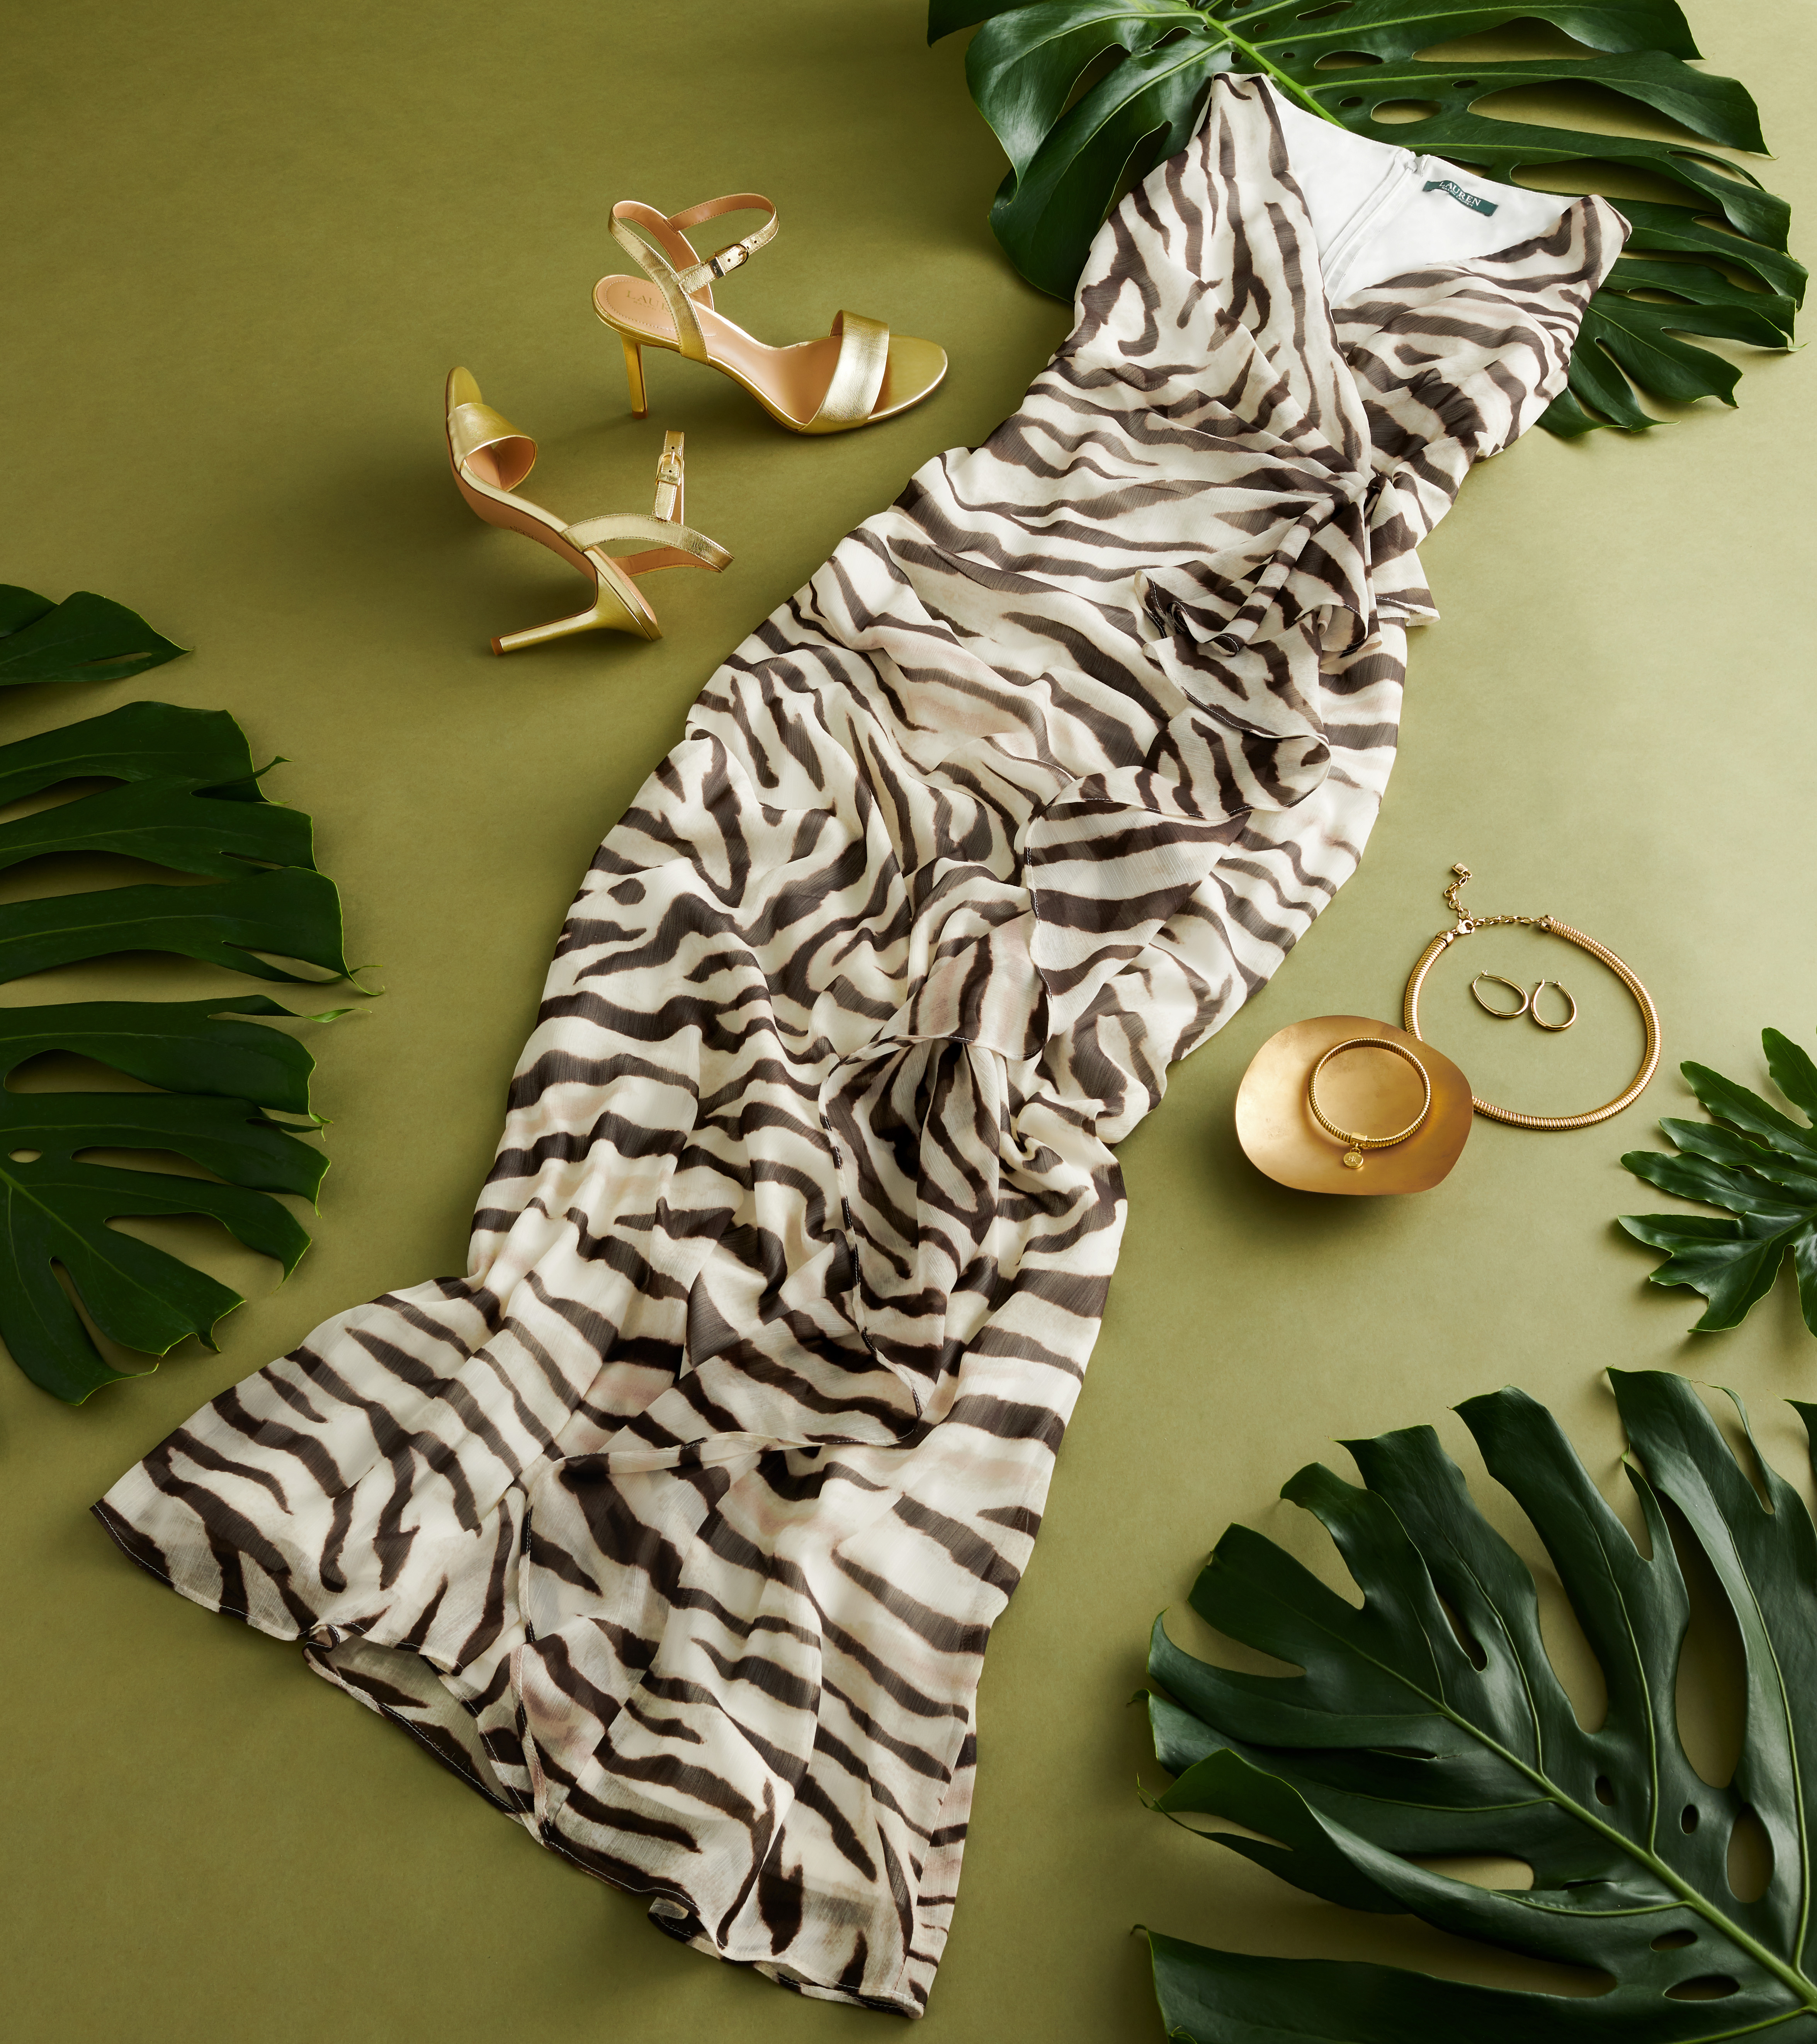 Fashion accessories and zebra dress by Alison Gootee Photography for Instyle and Ralph Lauren